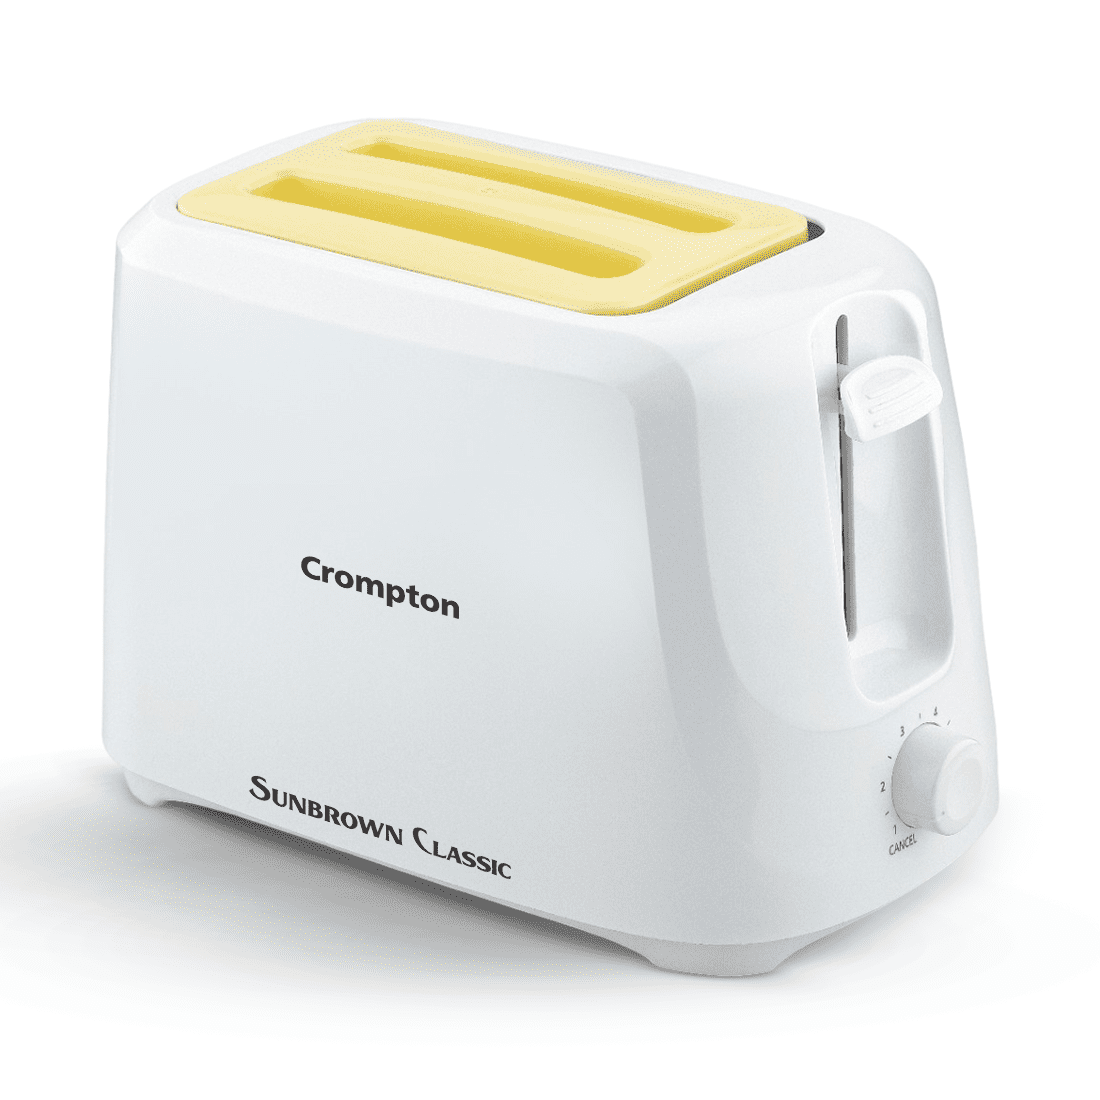 Sunbrown Classic Auto Pop up Toaster with 700W